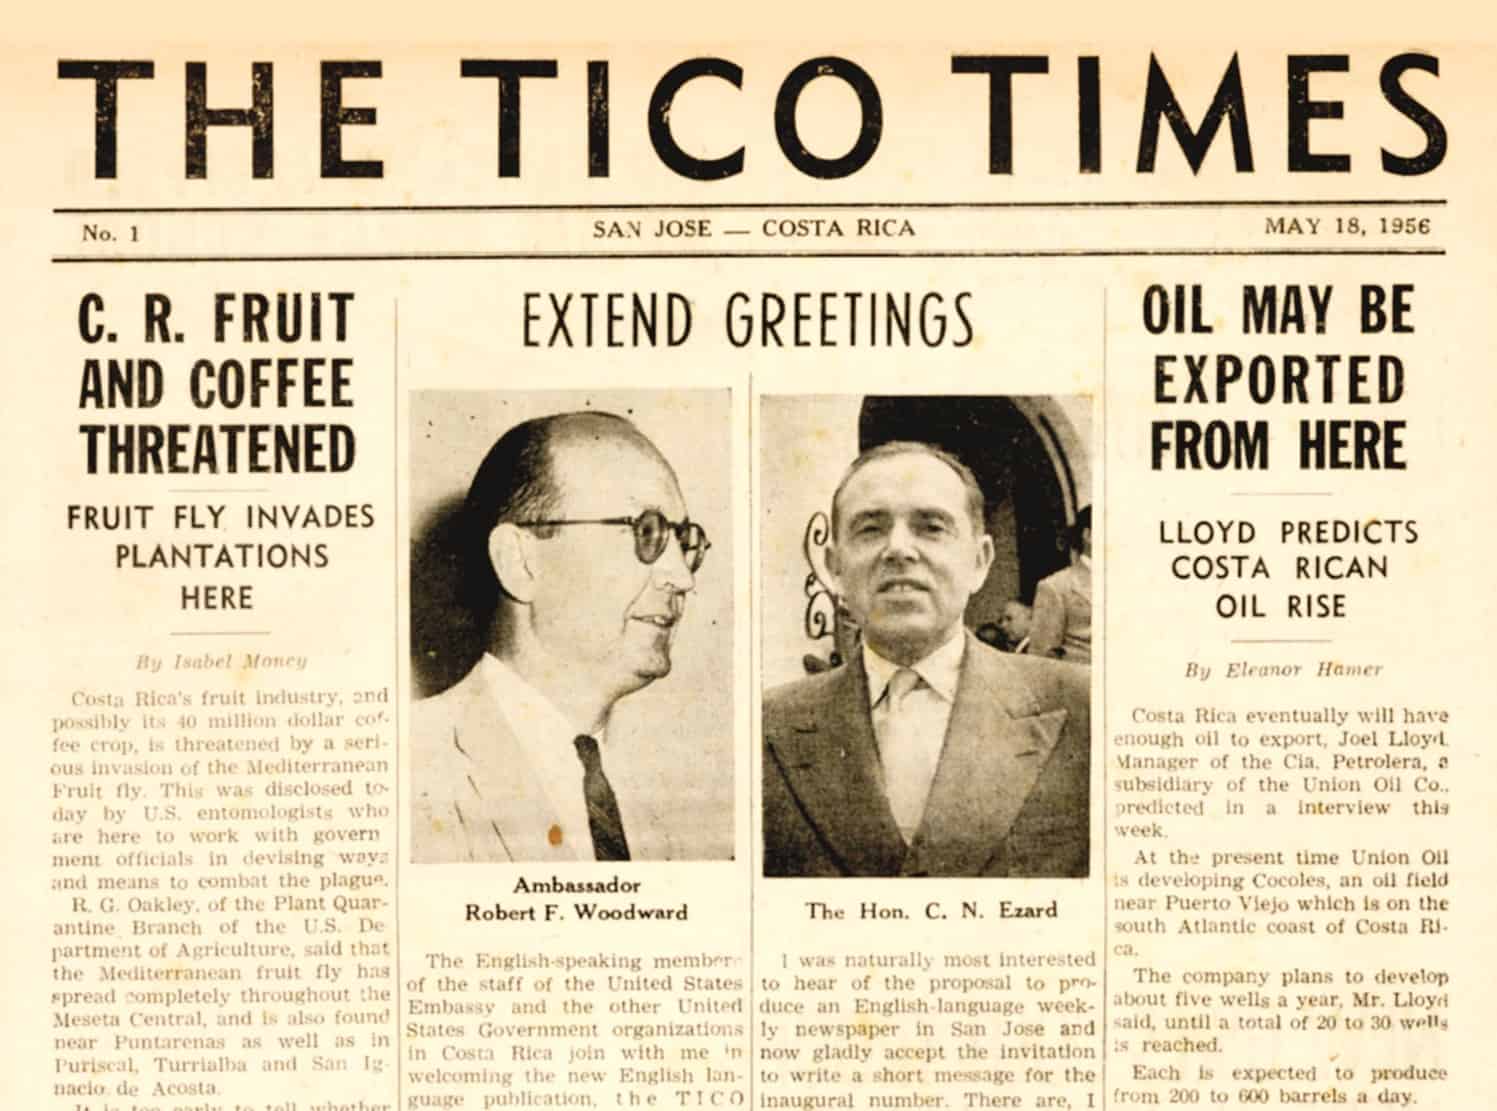 From the front page of The Tico Times' first issue in 1956.